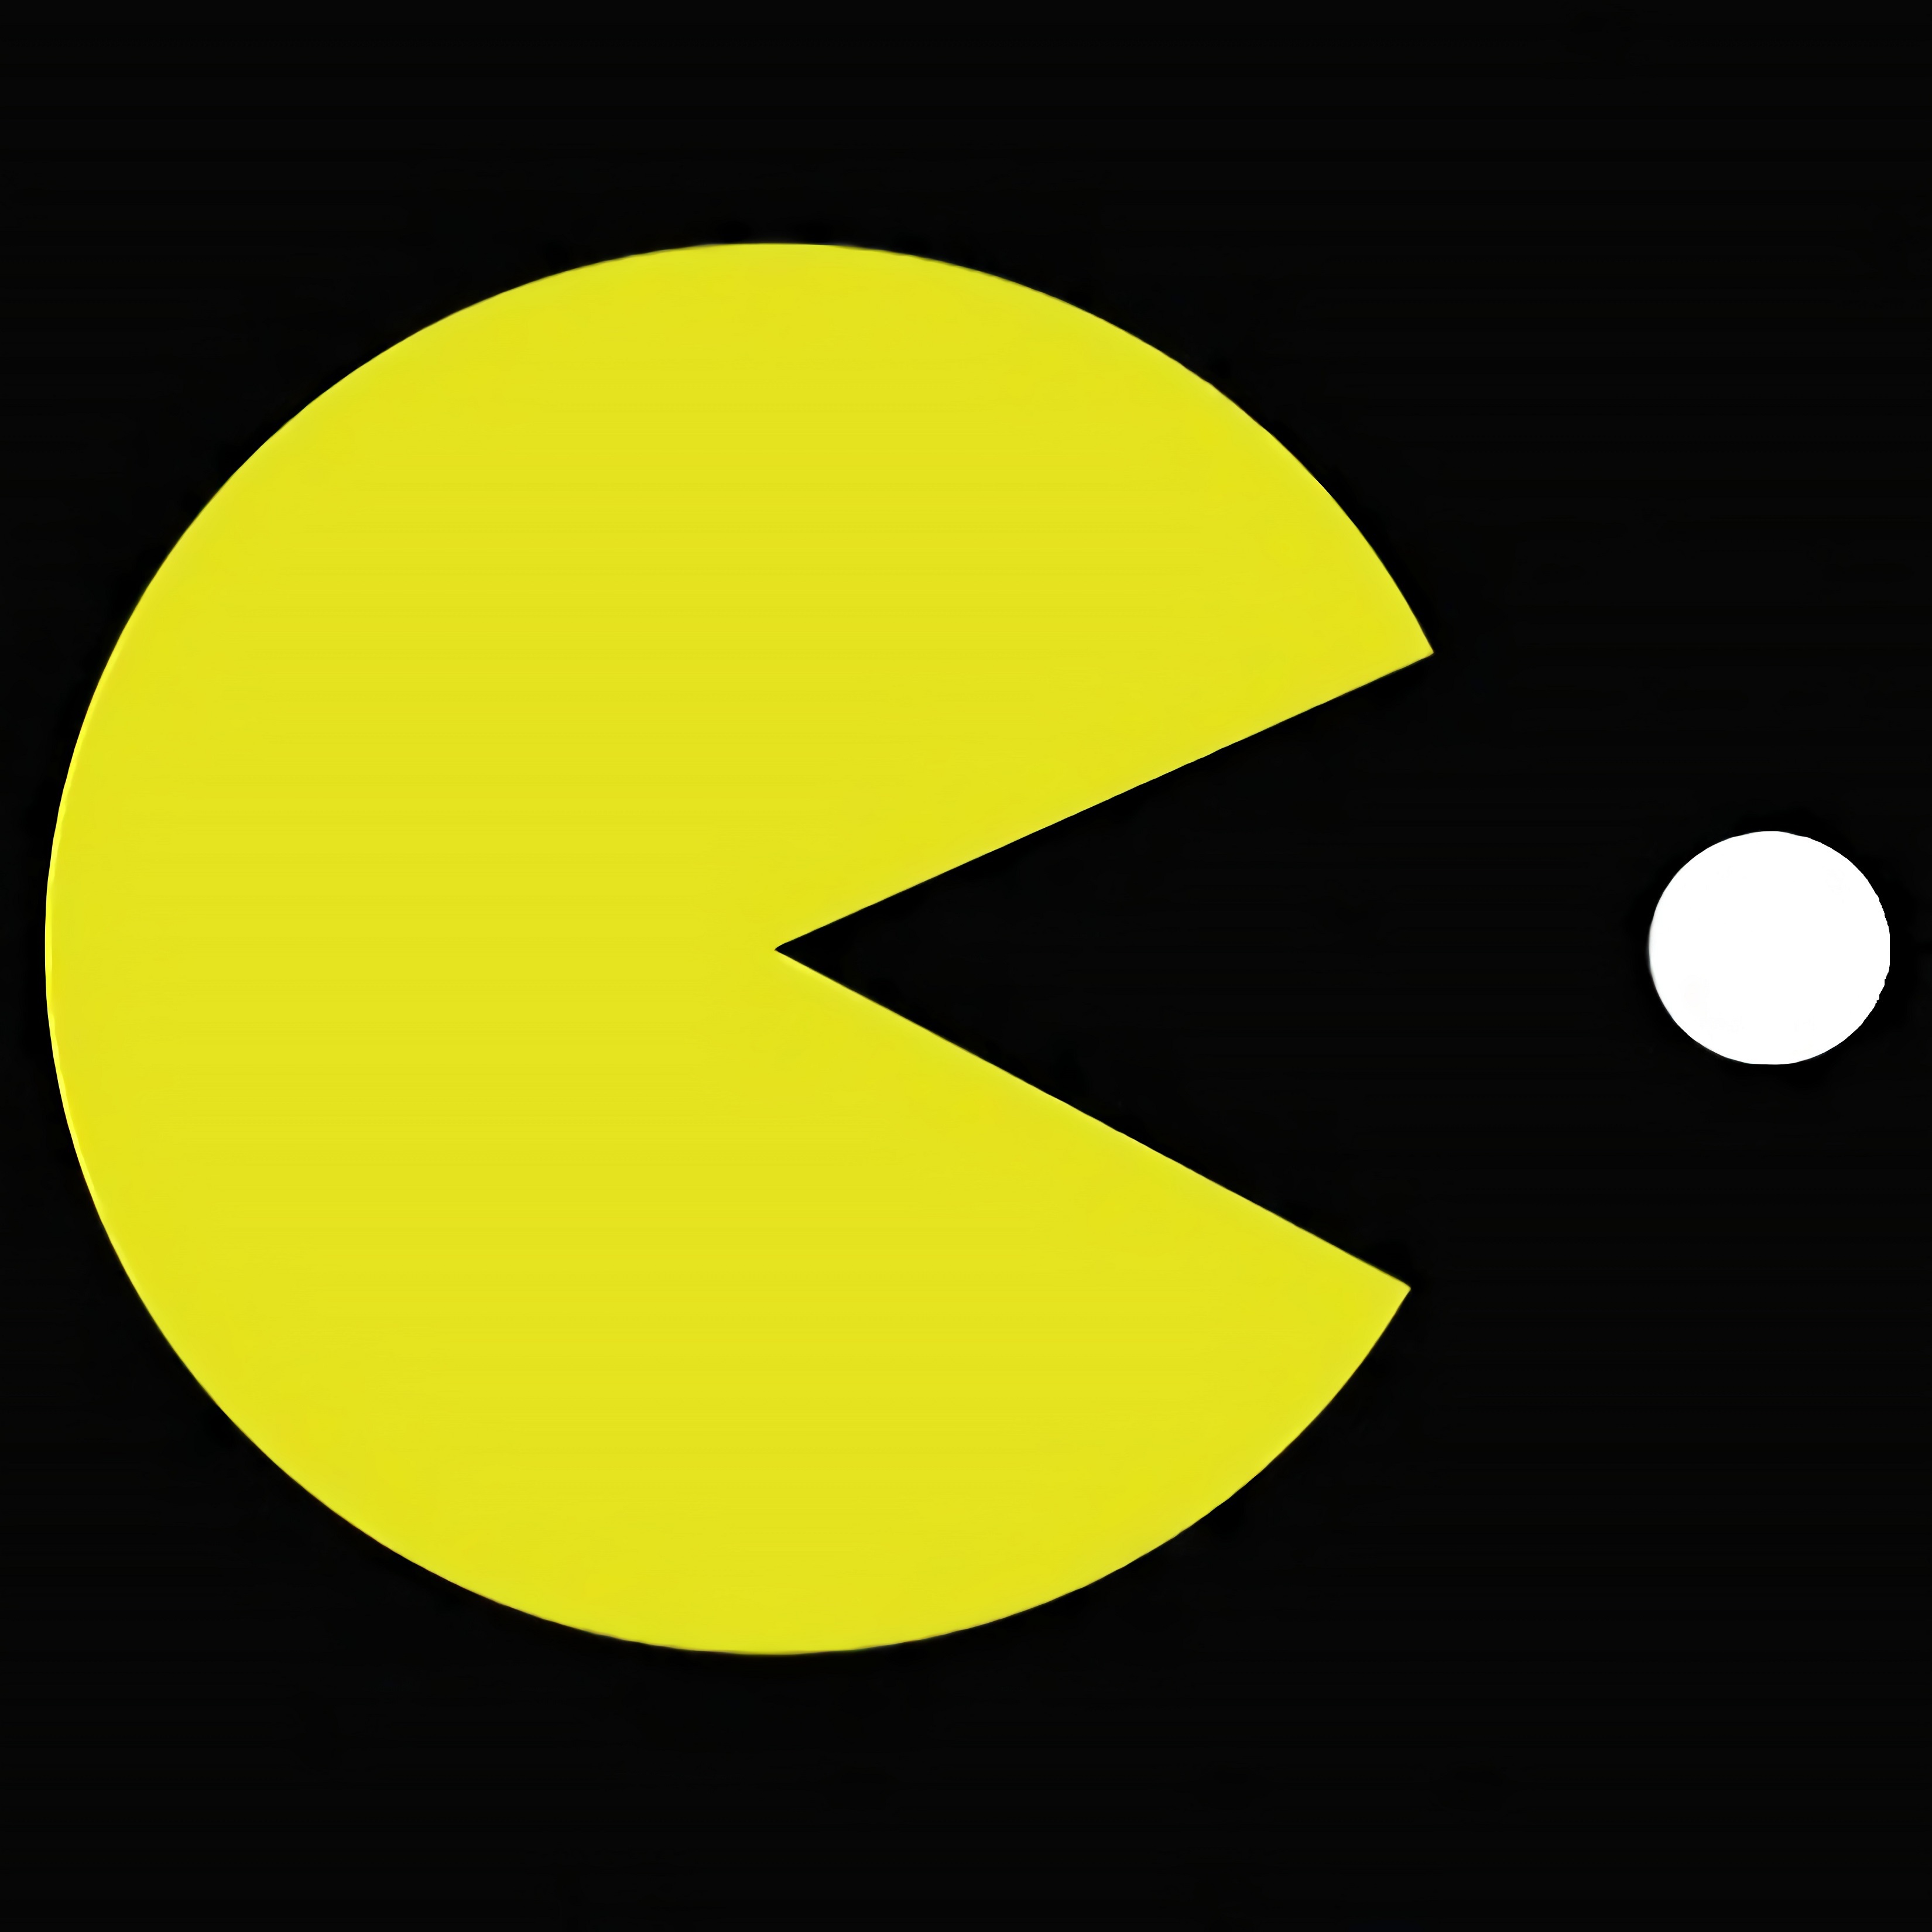 FRIV - with cool pacman! 